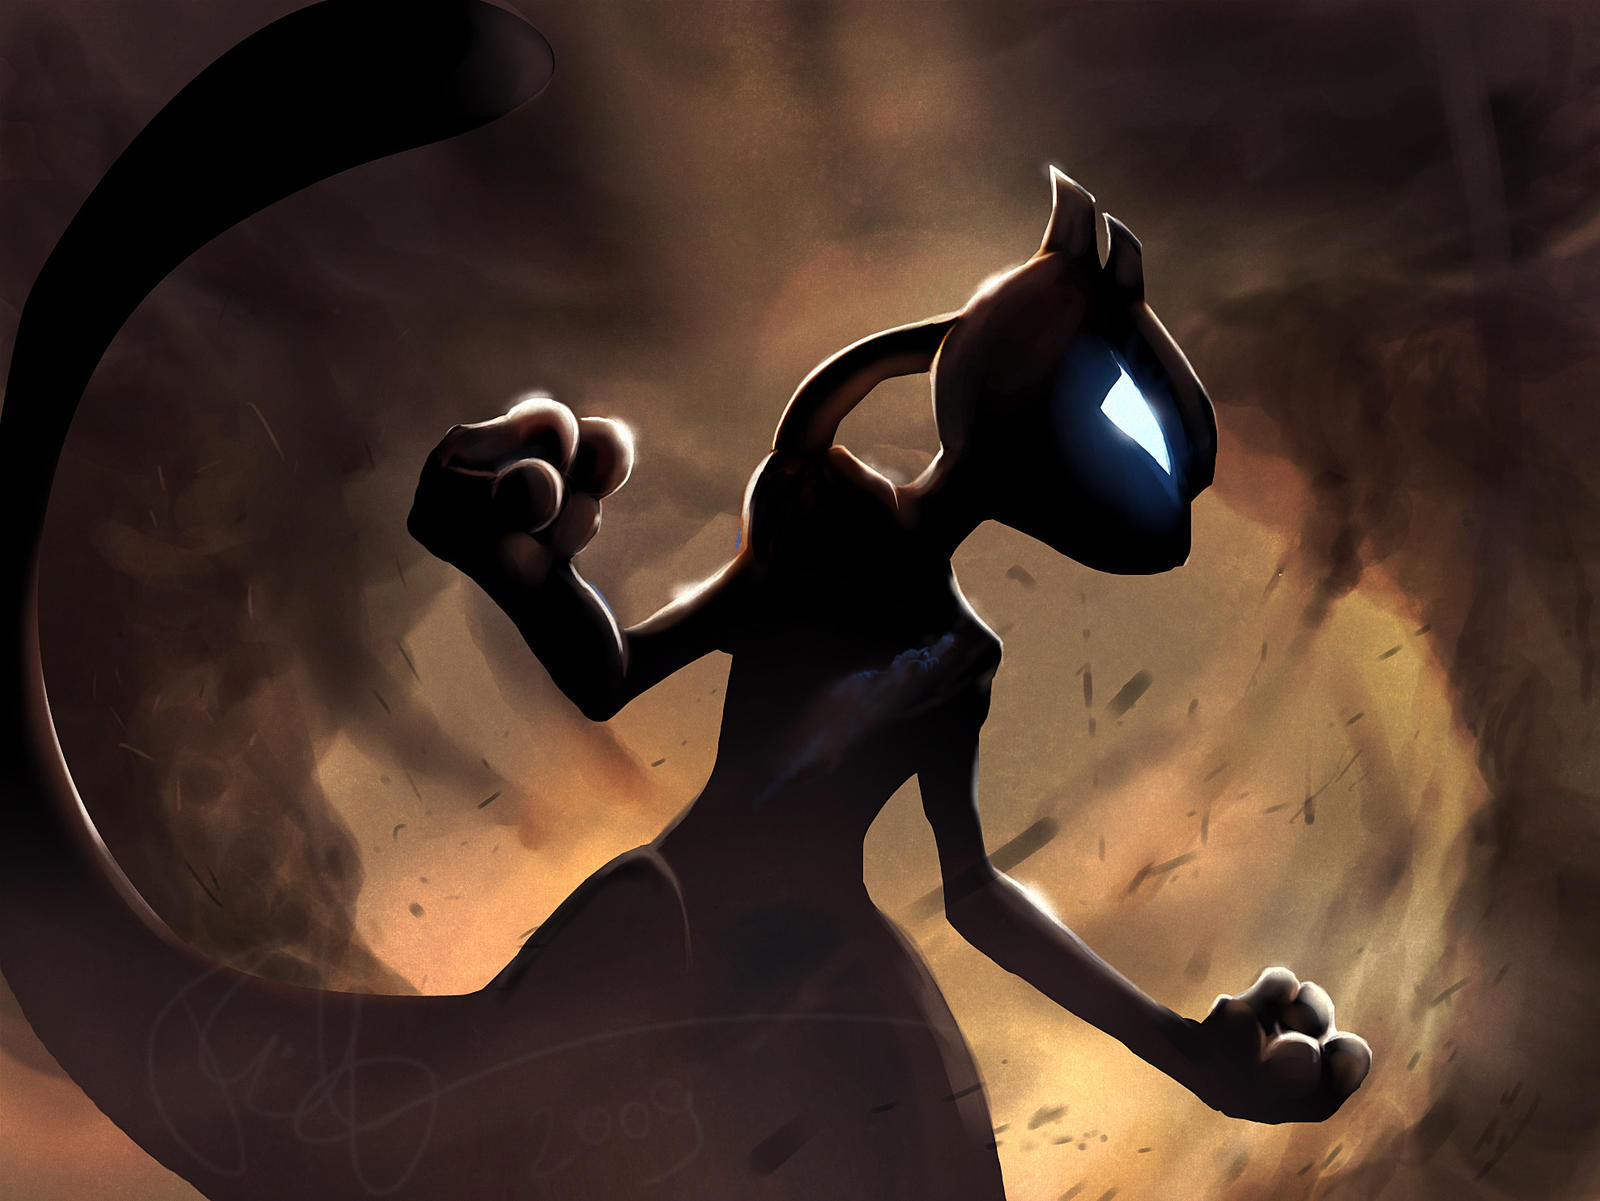 mewtwo_is_epic_by_lord_phillock-d2fb9lf